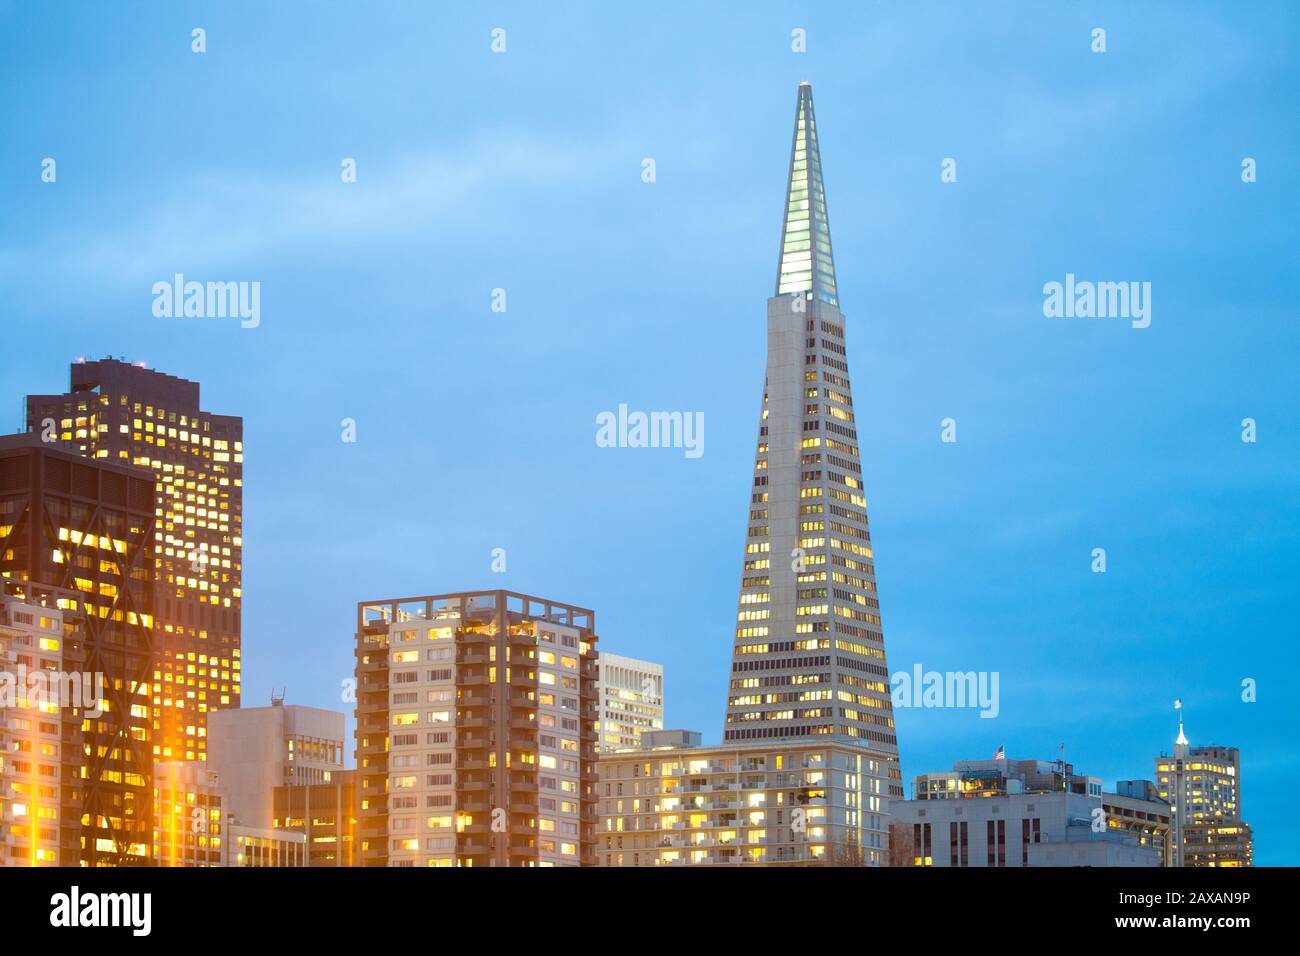 Skyline of  buildings at Financial District in San Francisco at night, California, United States Stock Photo